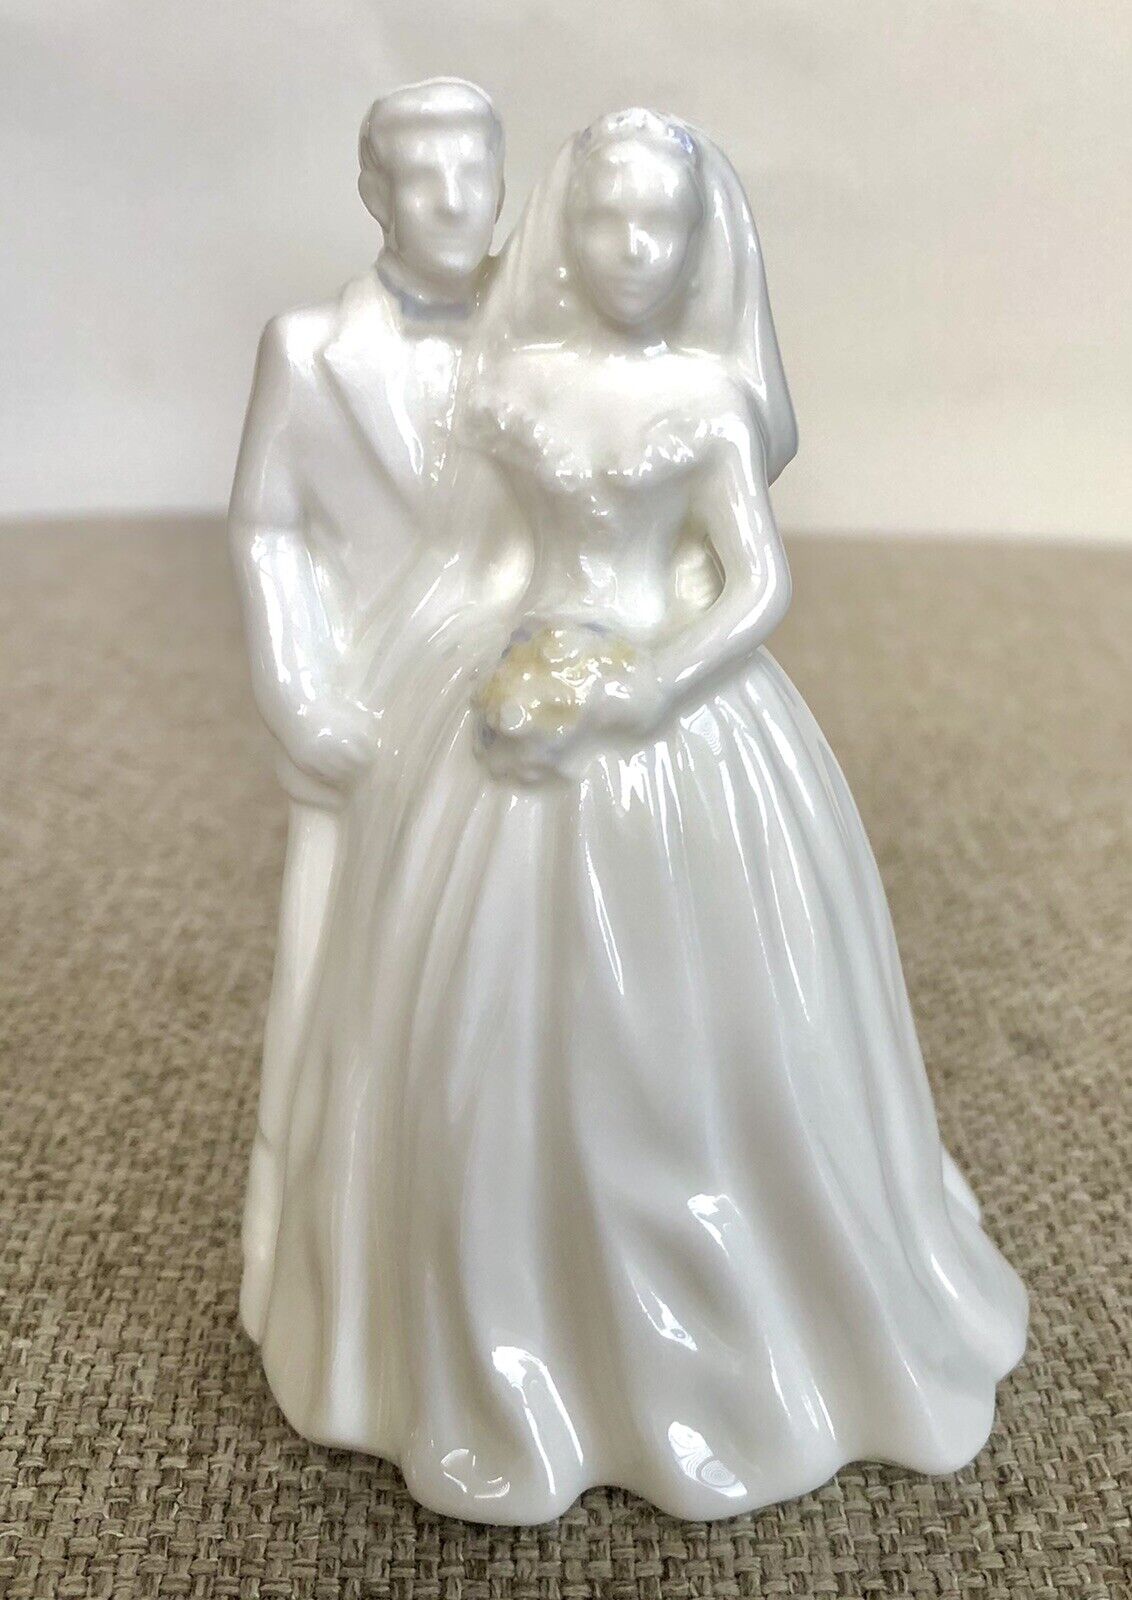 4” Height Wedgwood Wedding Day Hand Decorated Figurine England Mint Condition